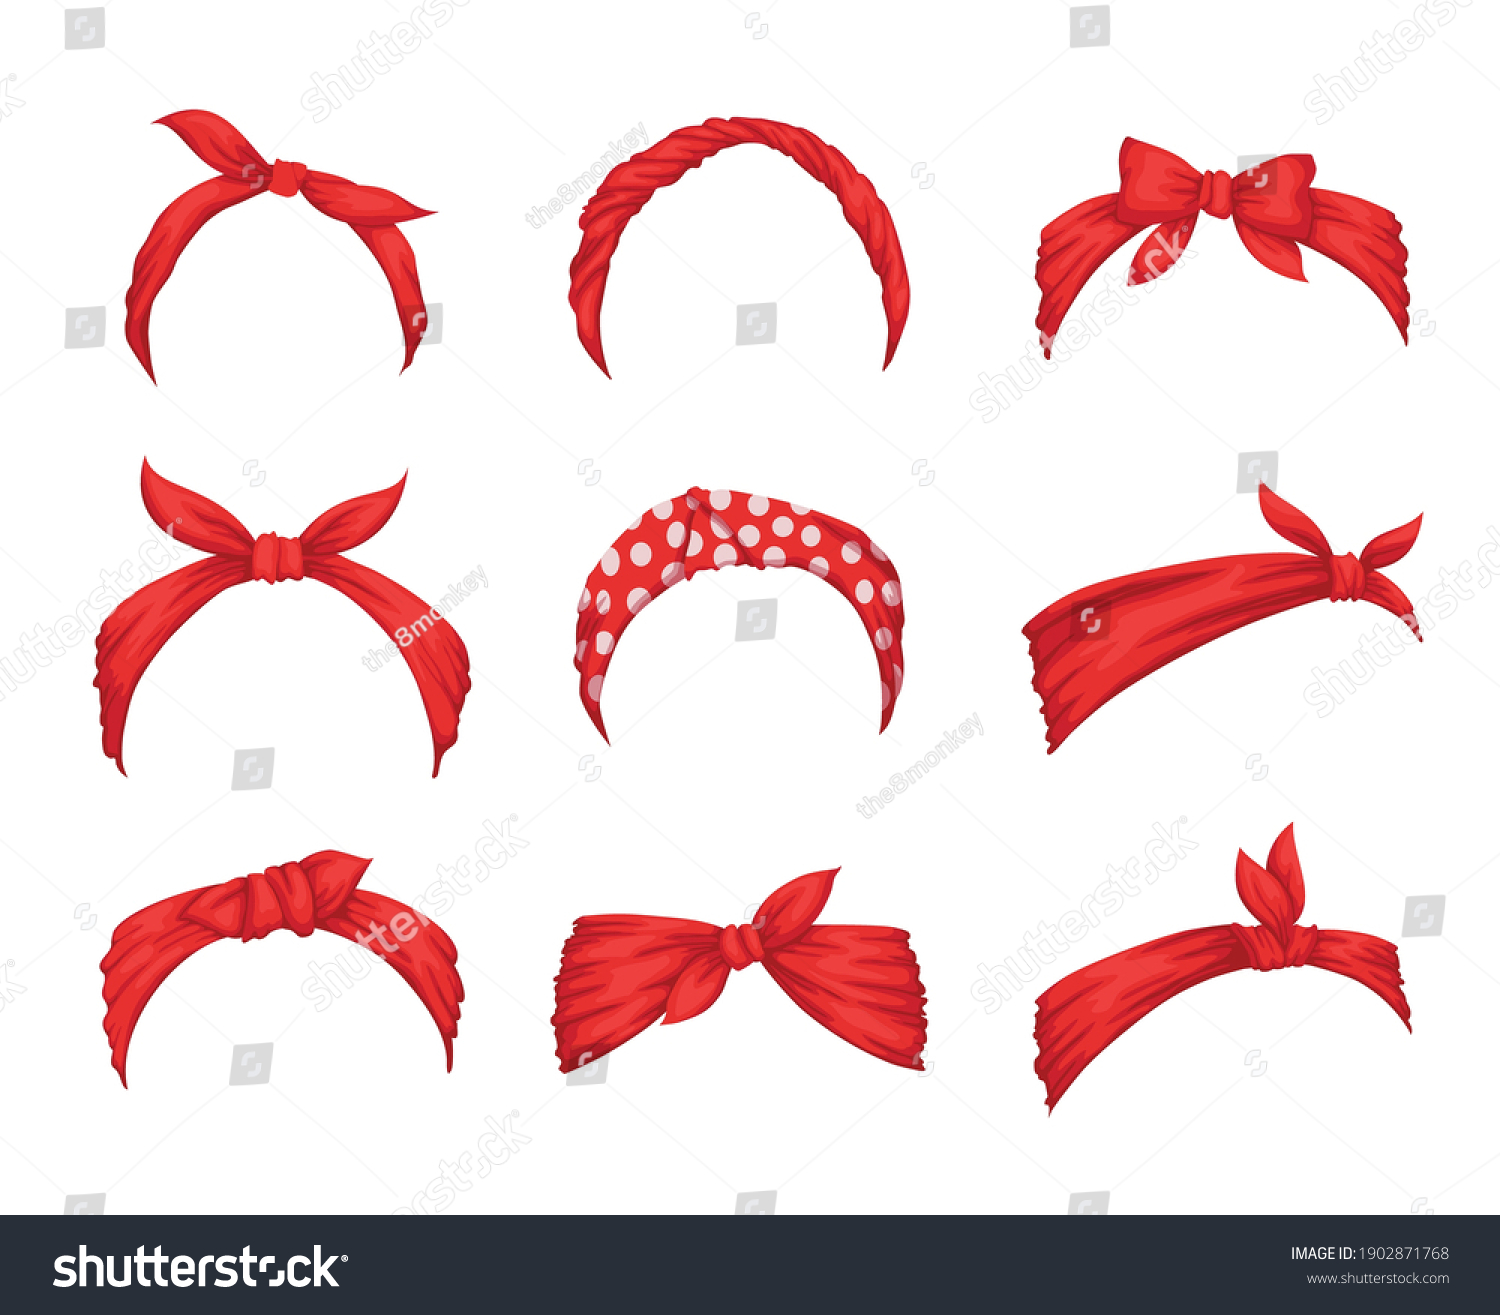 SVG of Set of retro headbands for woman. Collection of red bandanas for hairstyles. Windy hair dressing. Mockups of decorative hair knotted vintage scarves. Cute hairband or headdress vector illustration svg